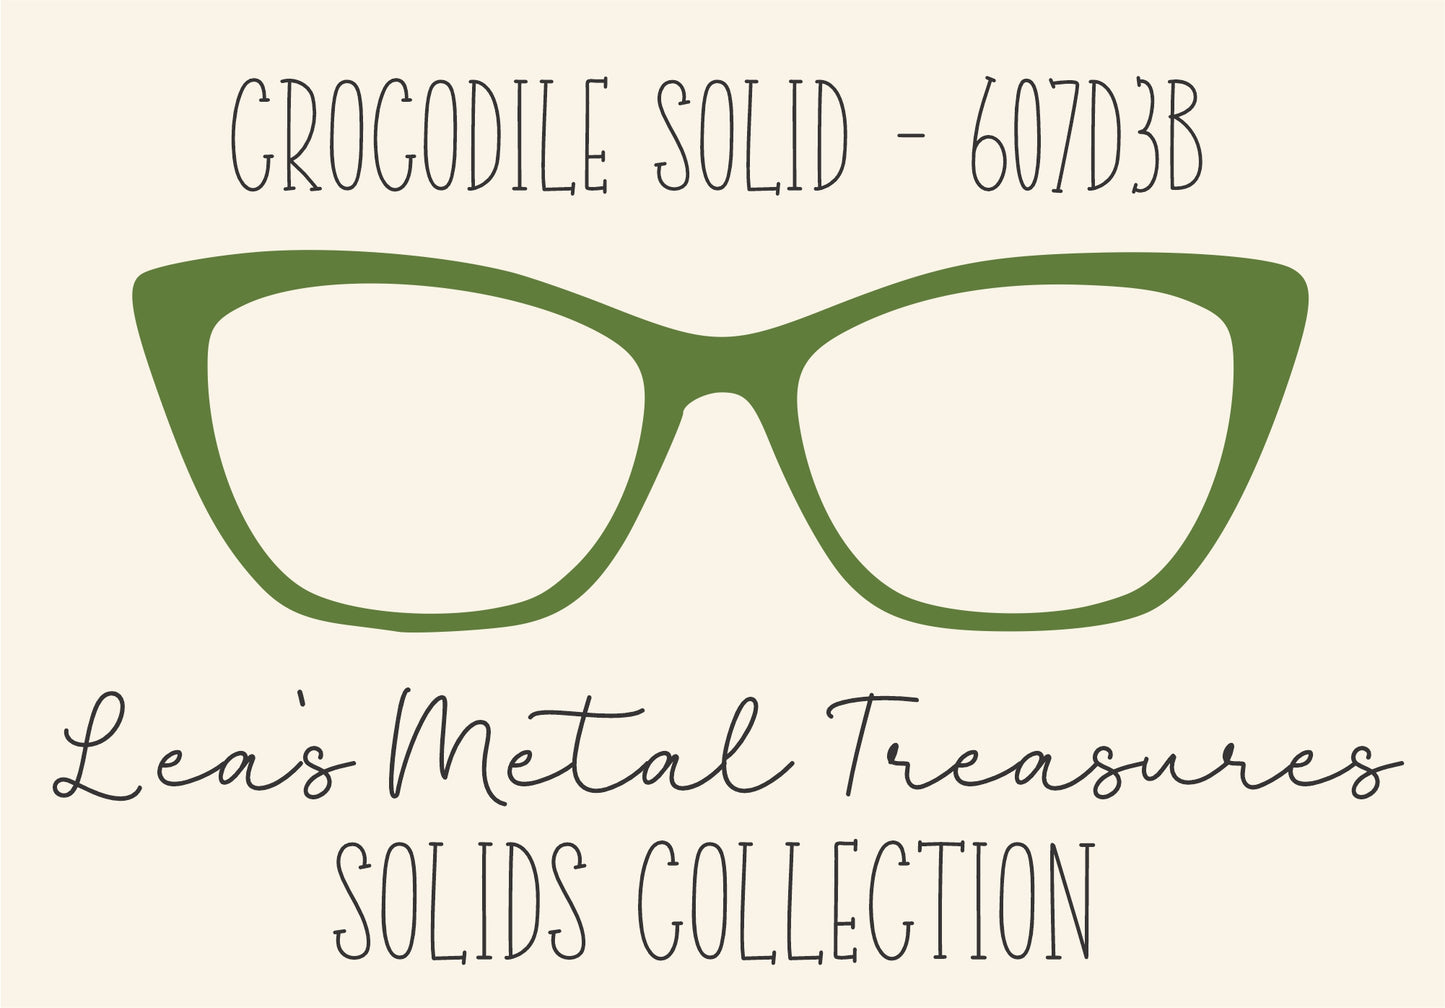 CROCODILE SOLID 607D3B Eyewear Frame Toppers COMES WITH MAGNETS